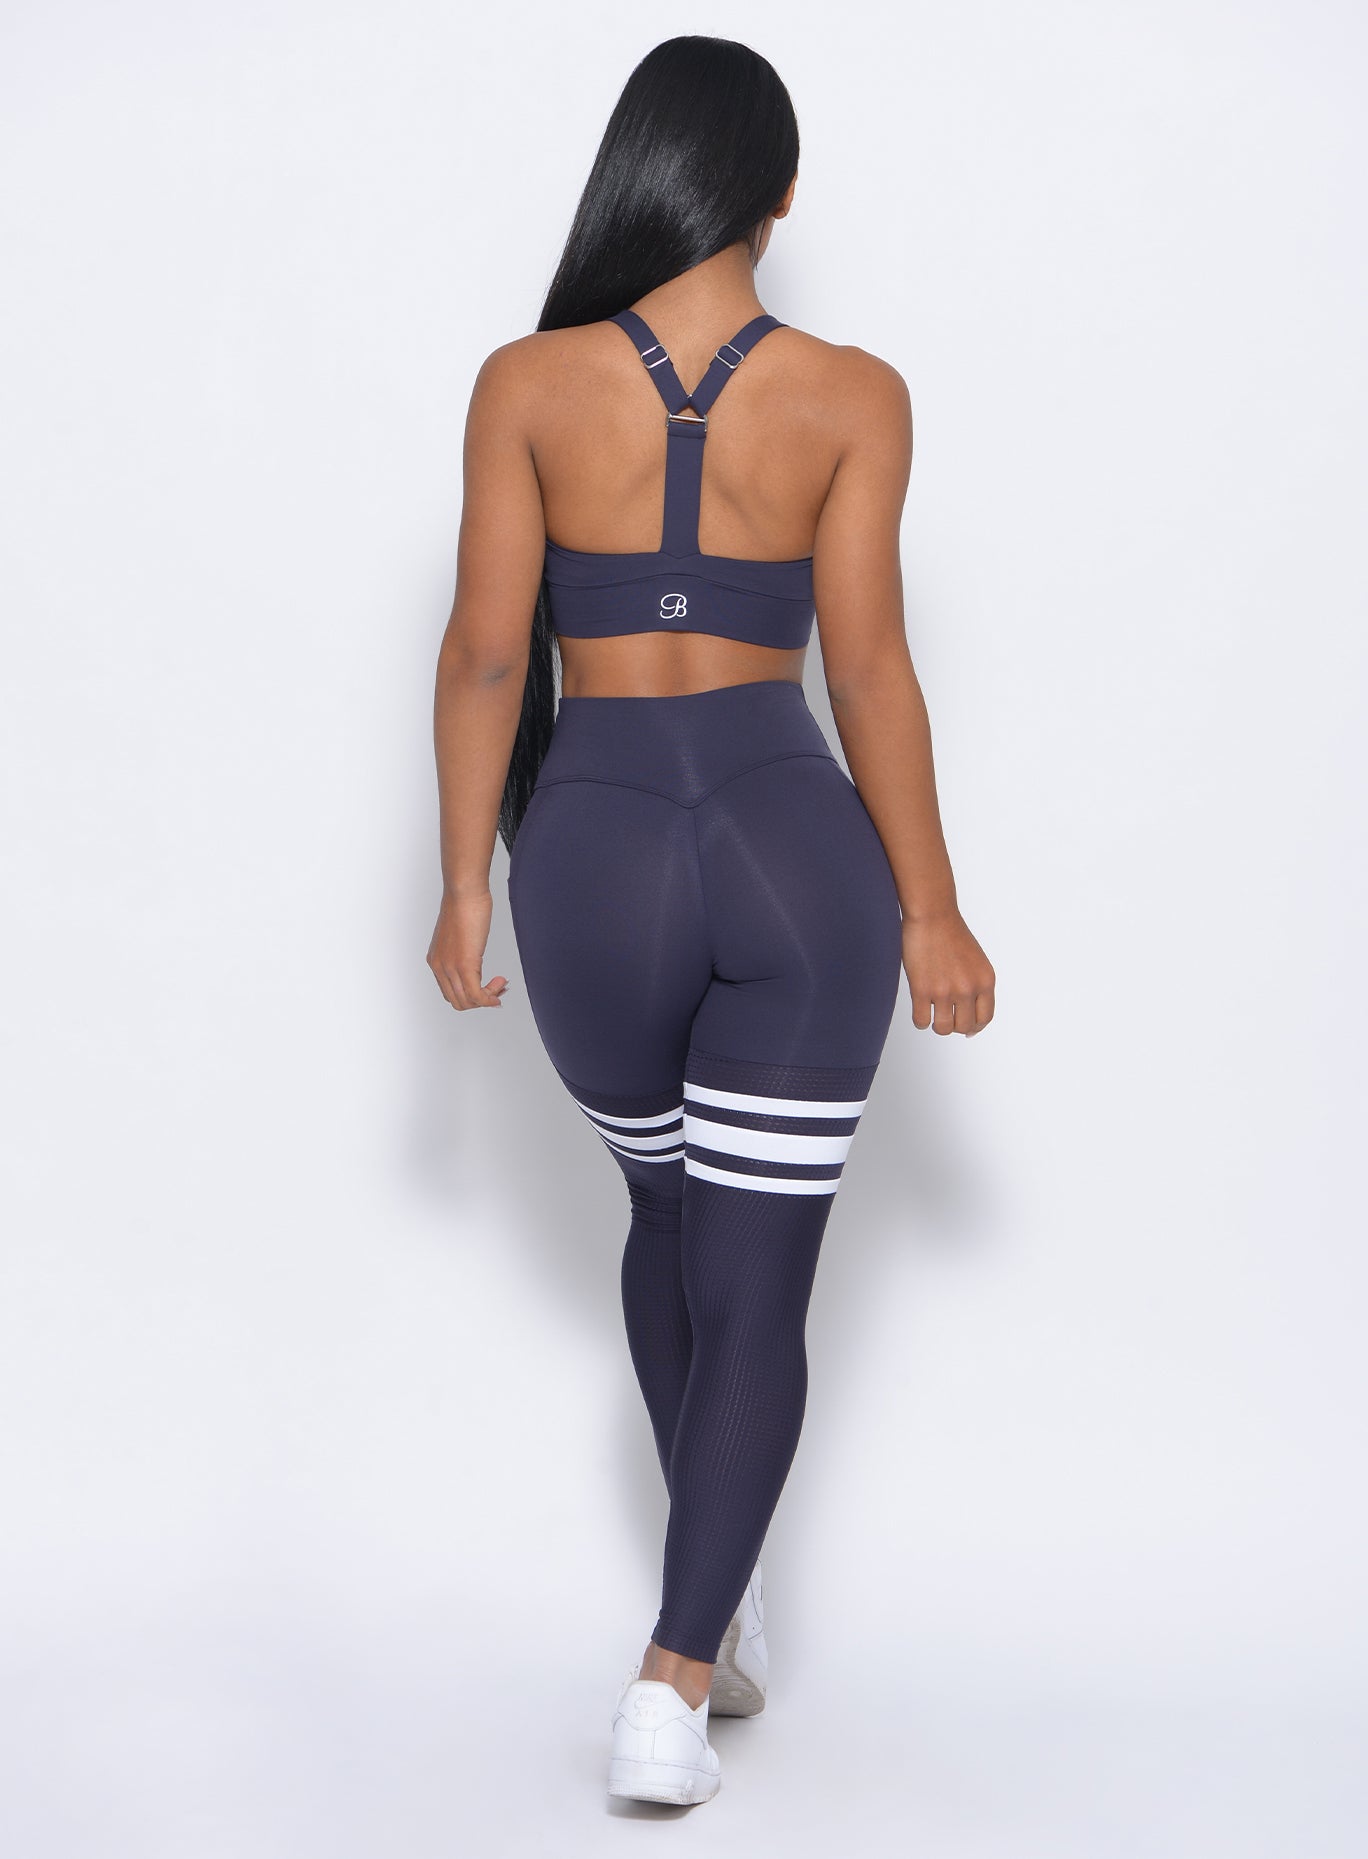 Back profile view of the model in our perform thigh highs in twilight blue color with white stripes and a matching bra